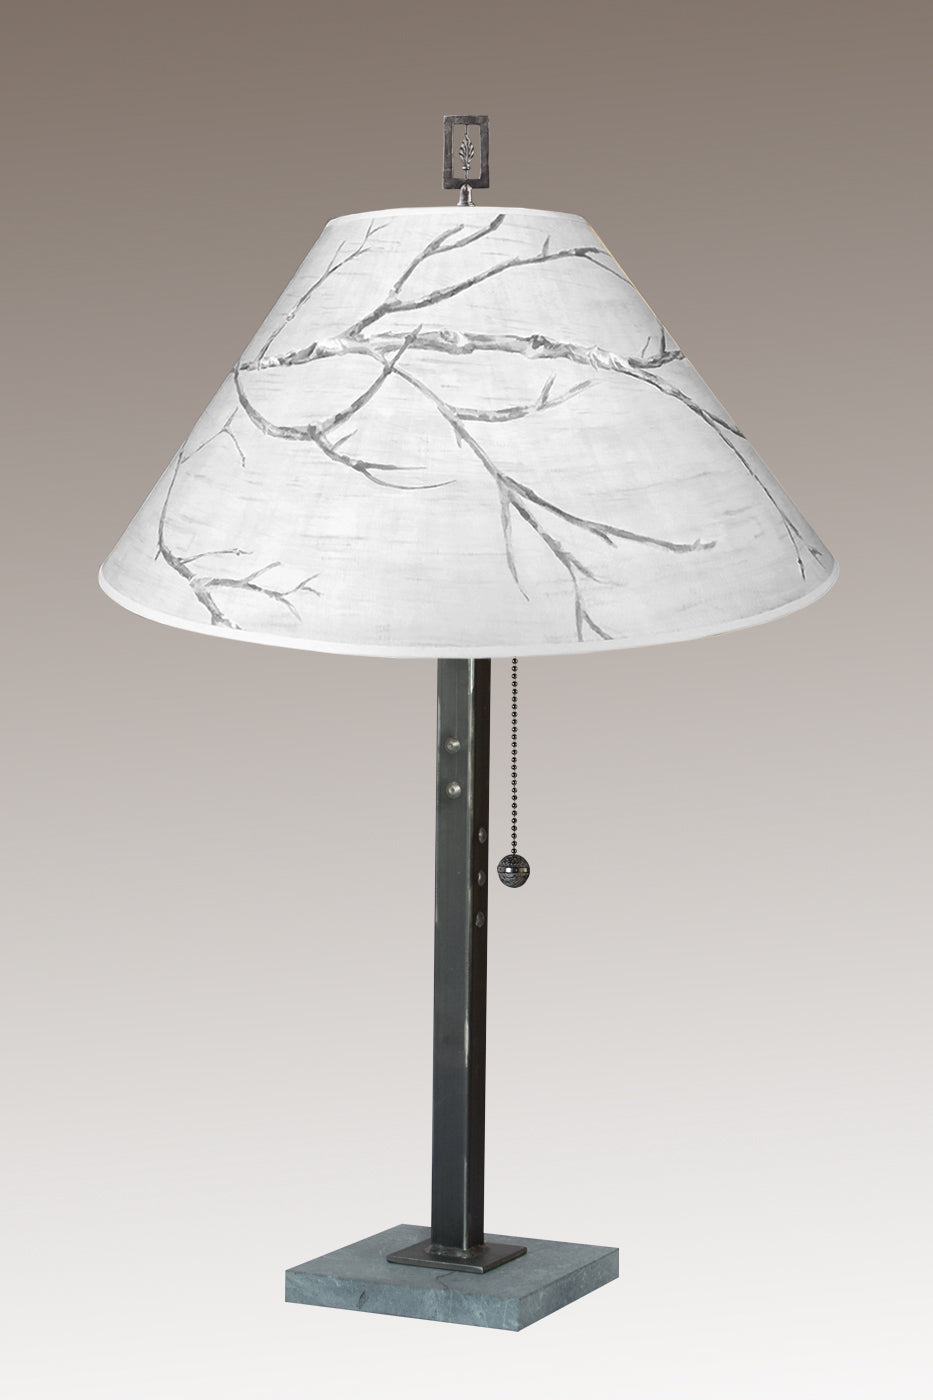 Janna Ugone &amp; Co Table Lamps Steel Table Lamp with Large Conical Shade in Sweeping Branch